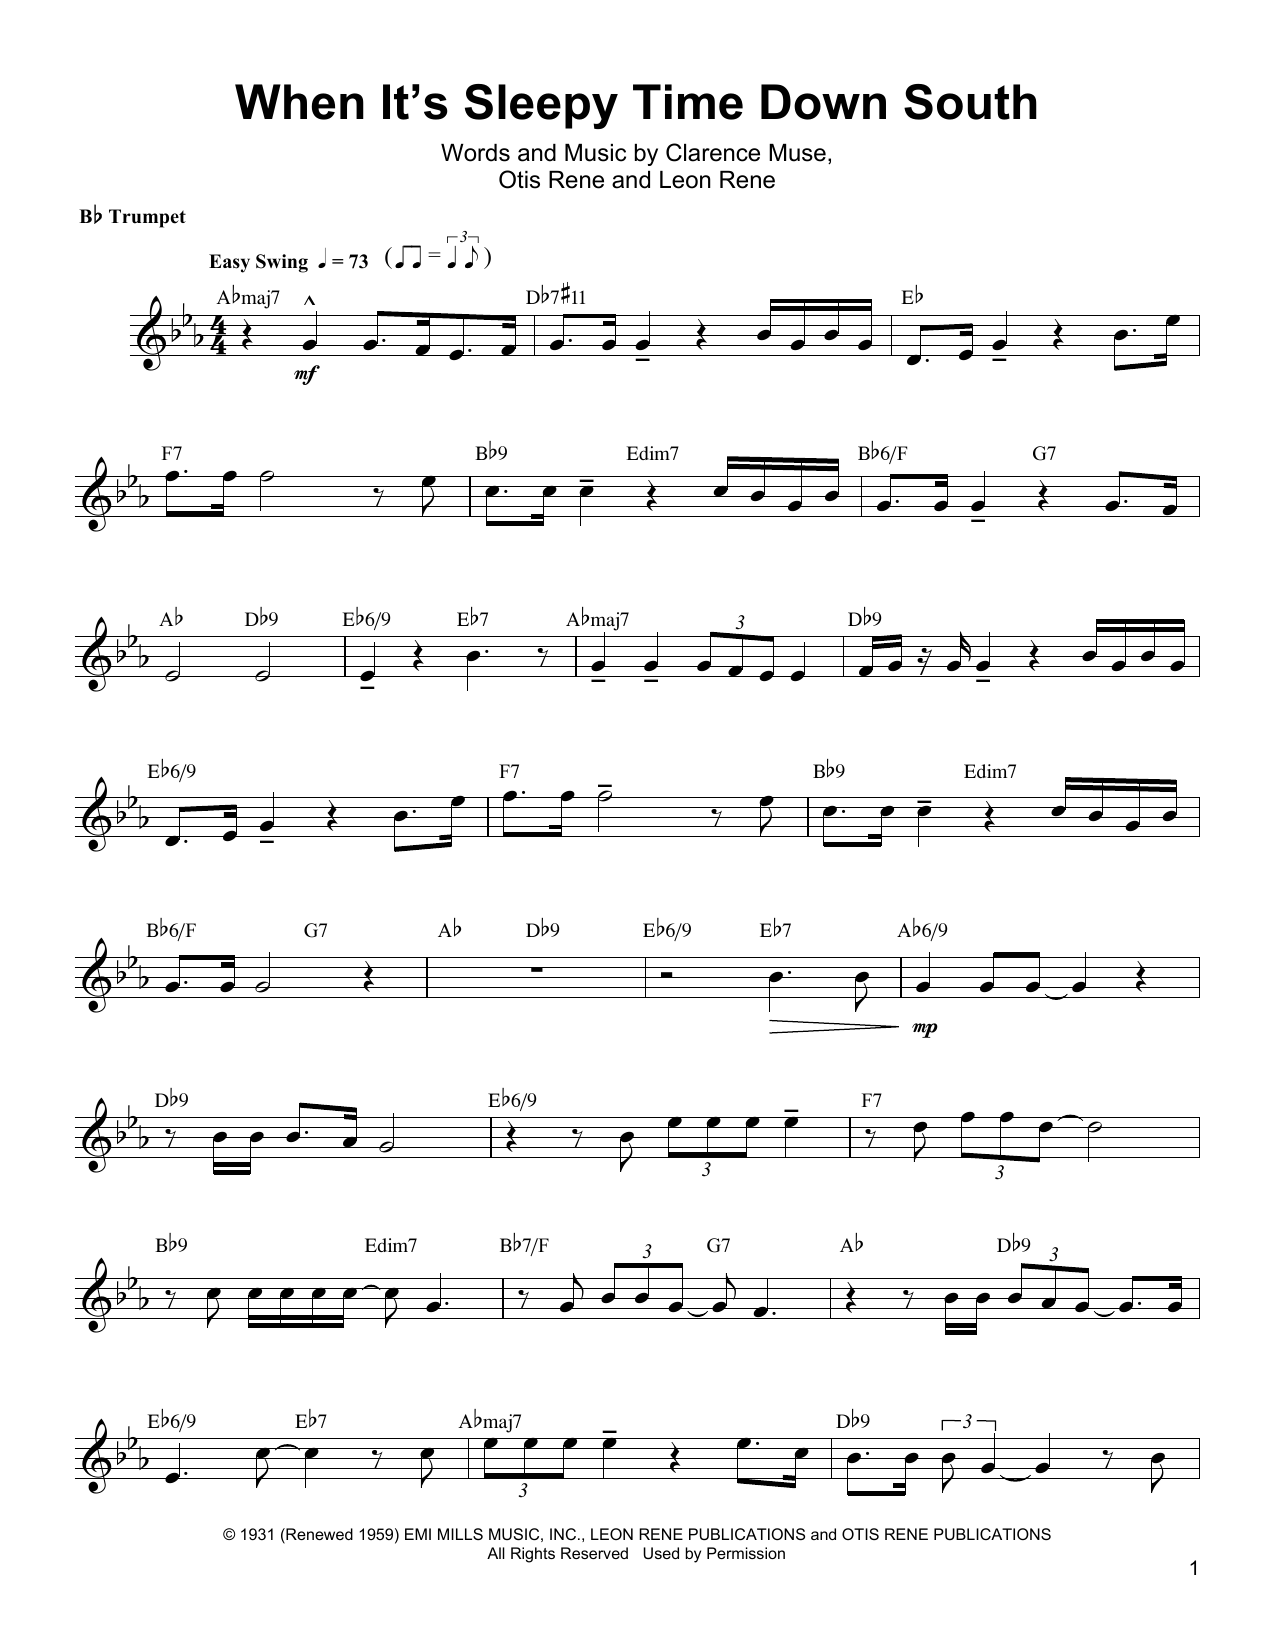 Download Arturo Sandoval When It's Sleepy Time Down South Sheet Music